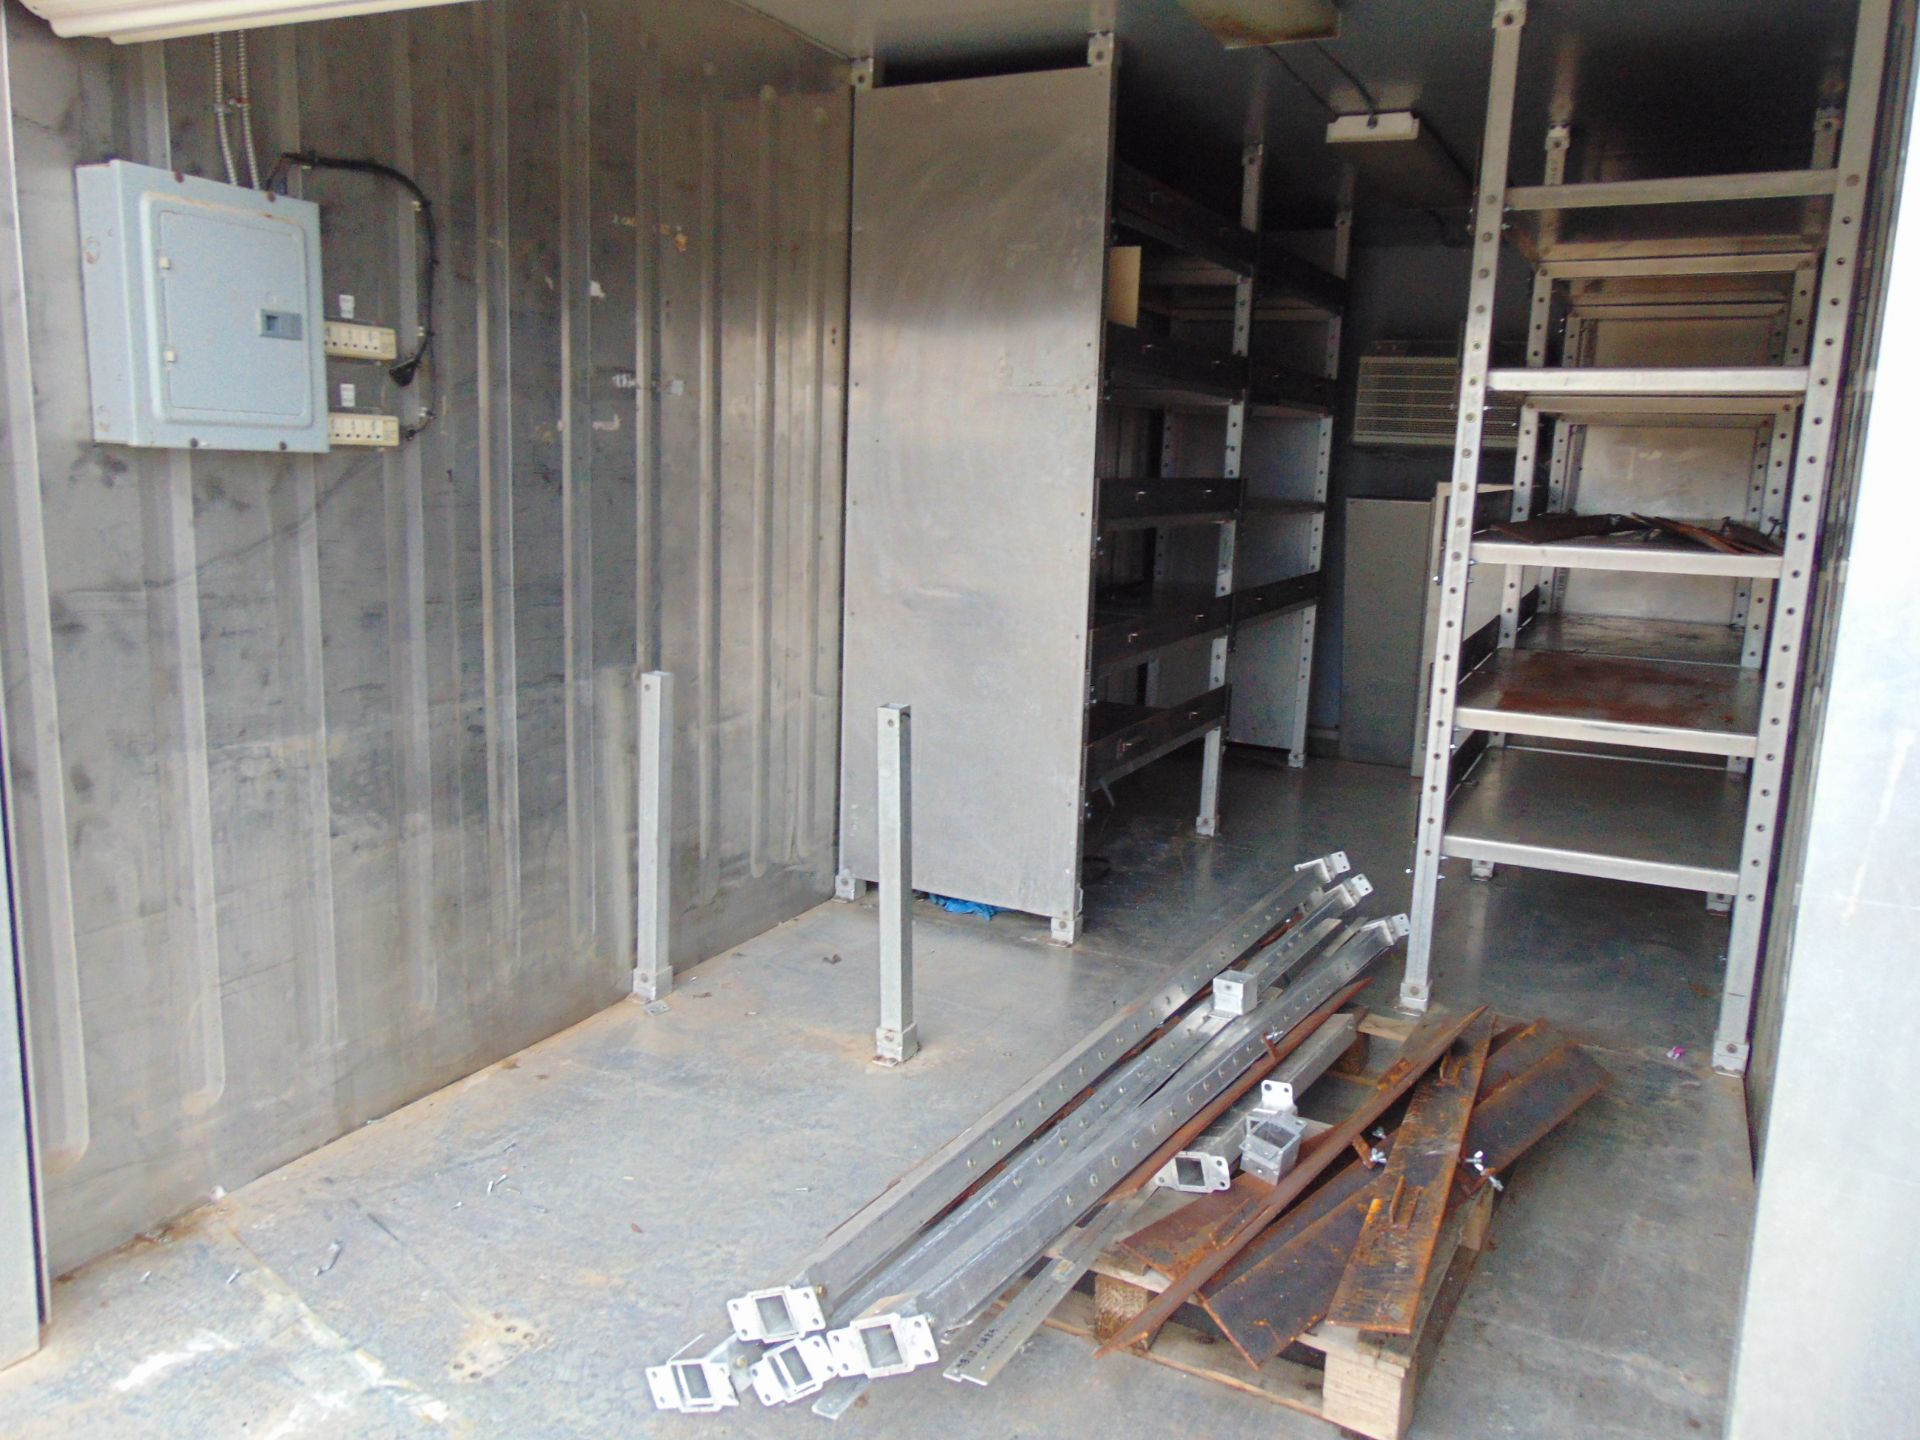 20' ISO Shipping Container C/W Stainless Steel Interior Lining, A/C, Roller Shutter Door etc - Image 3 of 18